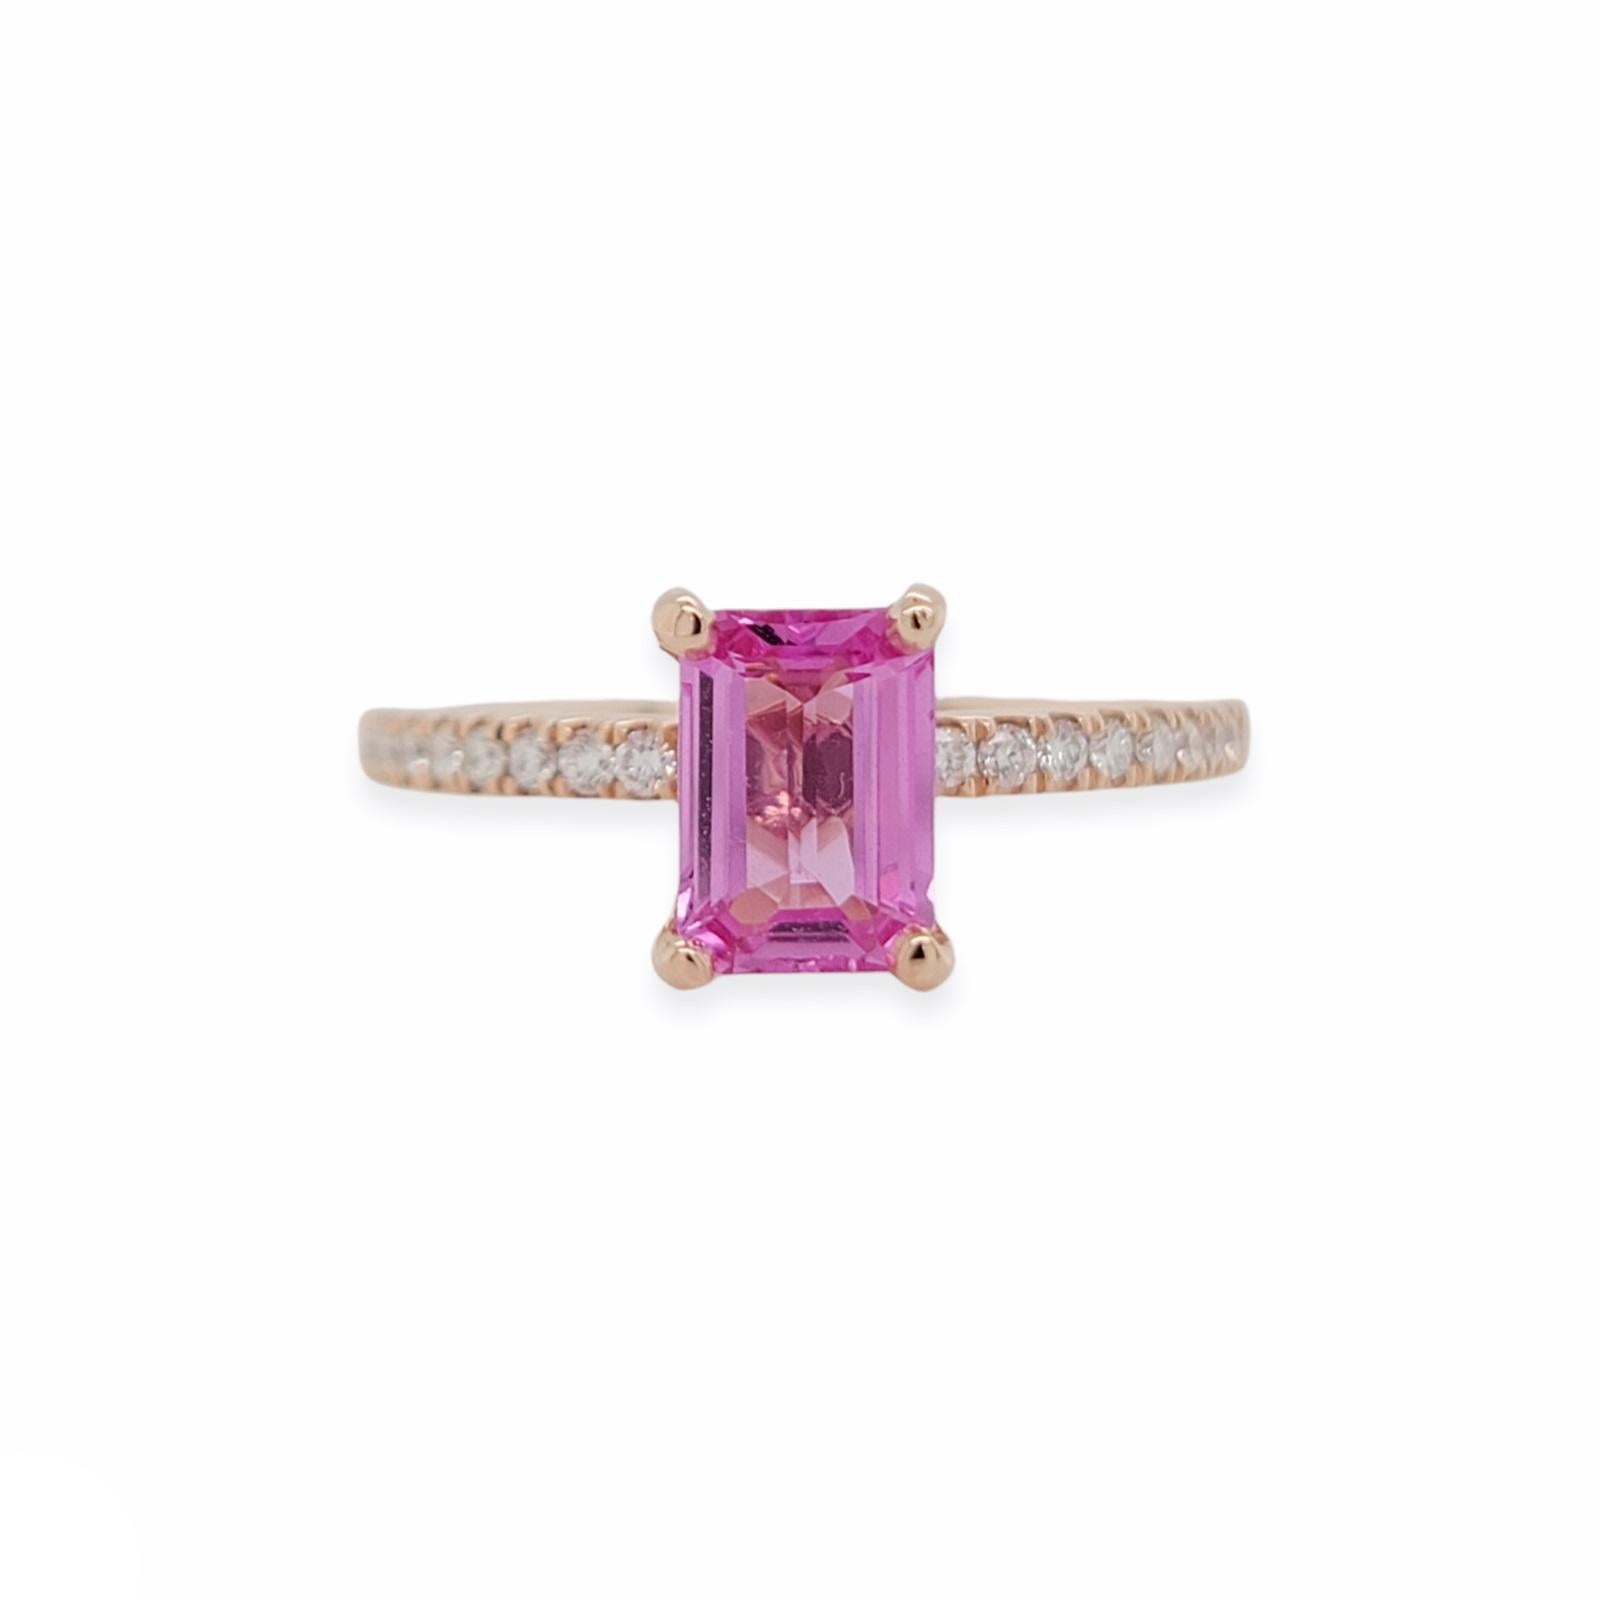 100% Authentic, 100% Customer Satisfaction

Height: 8 mm

Width: 1.5 mm

Size: 6.5 ( Contact Us for Sizing)

Metal:14K Rose Gold

Hallmarks: 14K

Total Weight: 4.18 Grams

Stone Type: 1.08 CT Natural Pink Sapphire & 0.20 CT Diamonds

Condition: